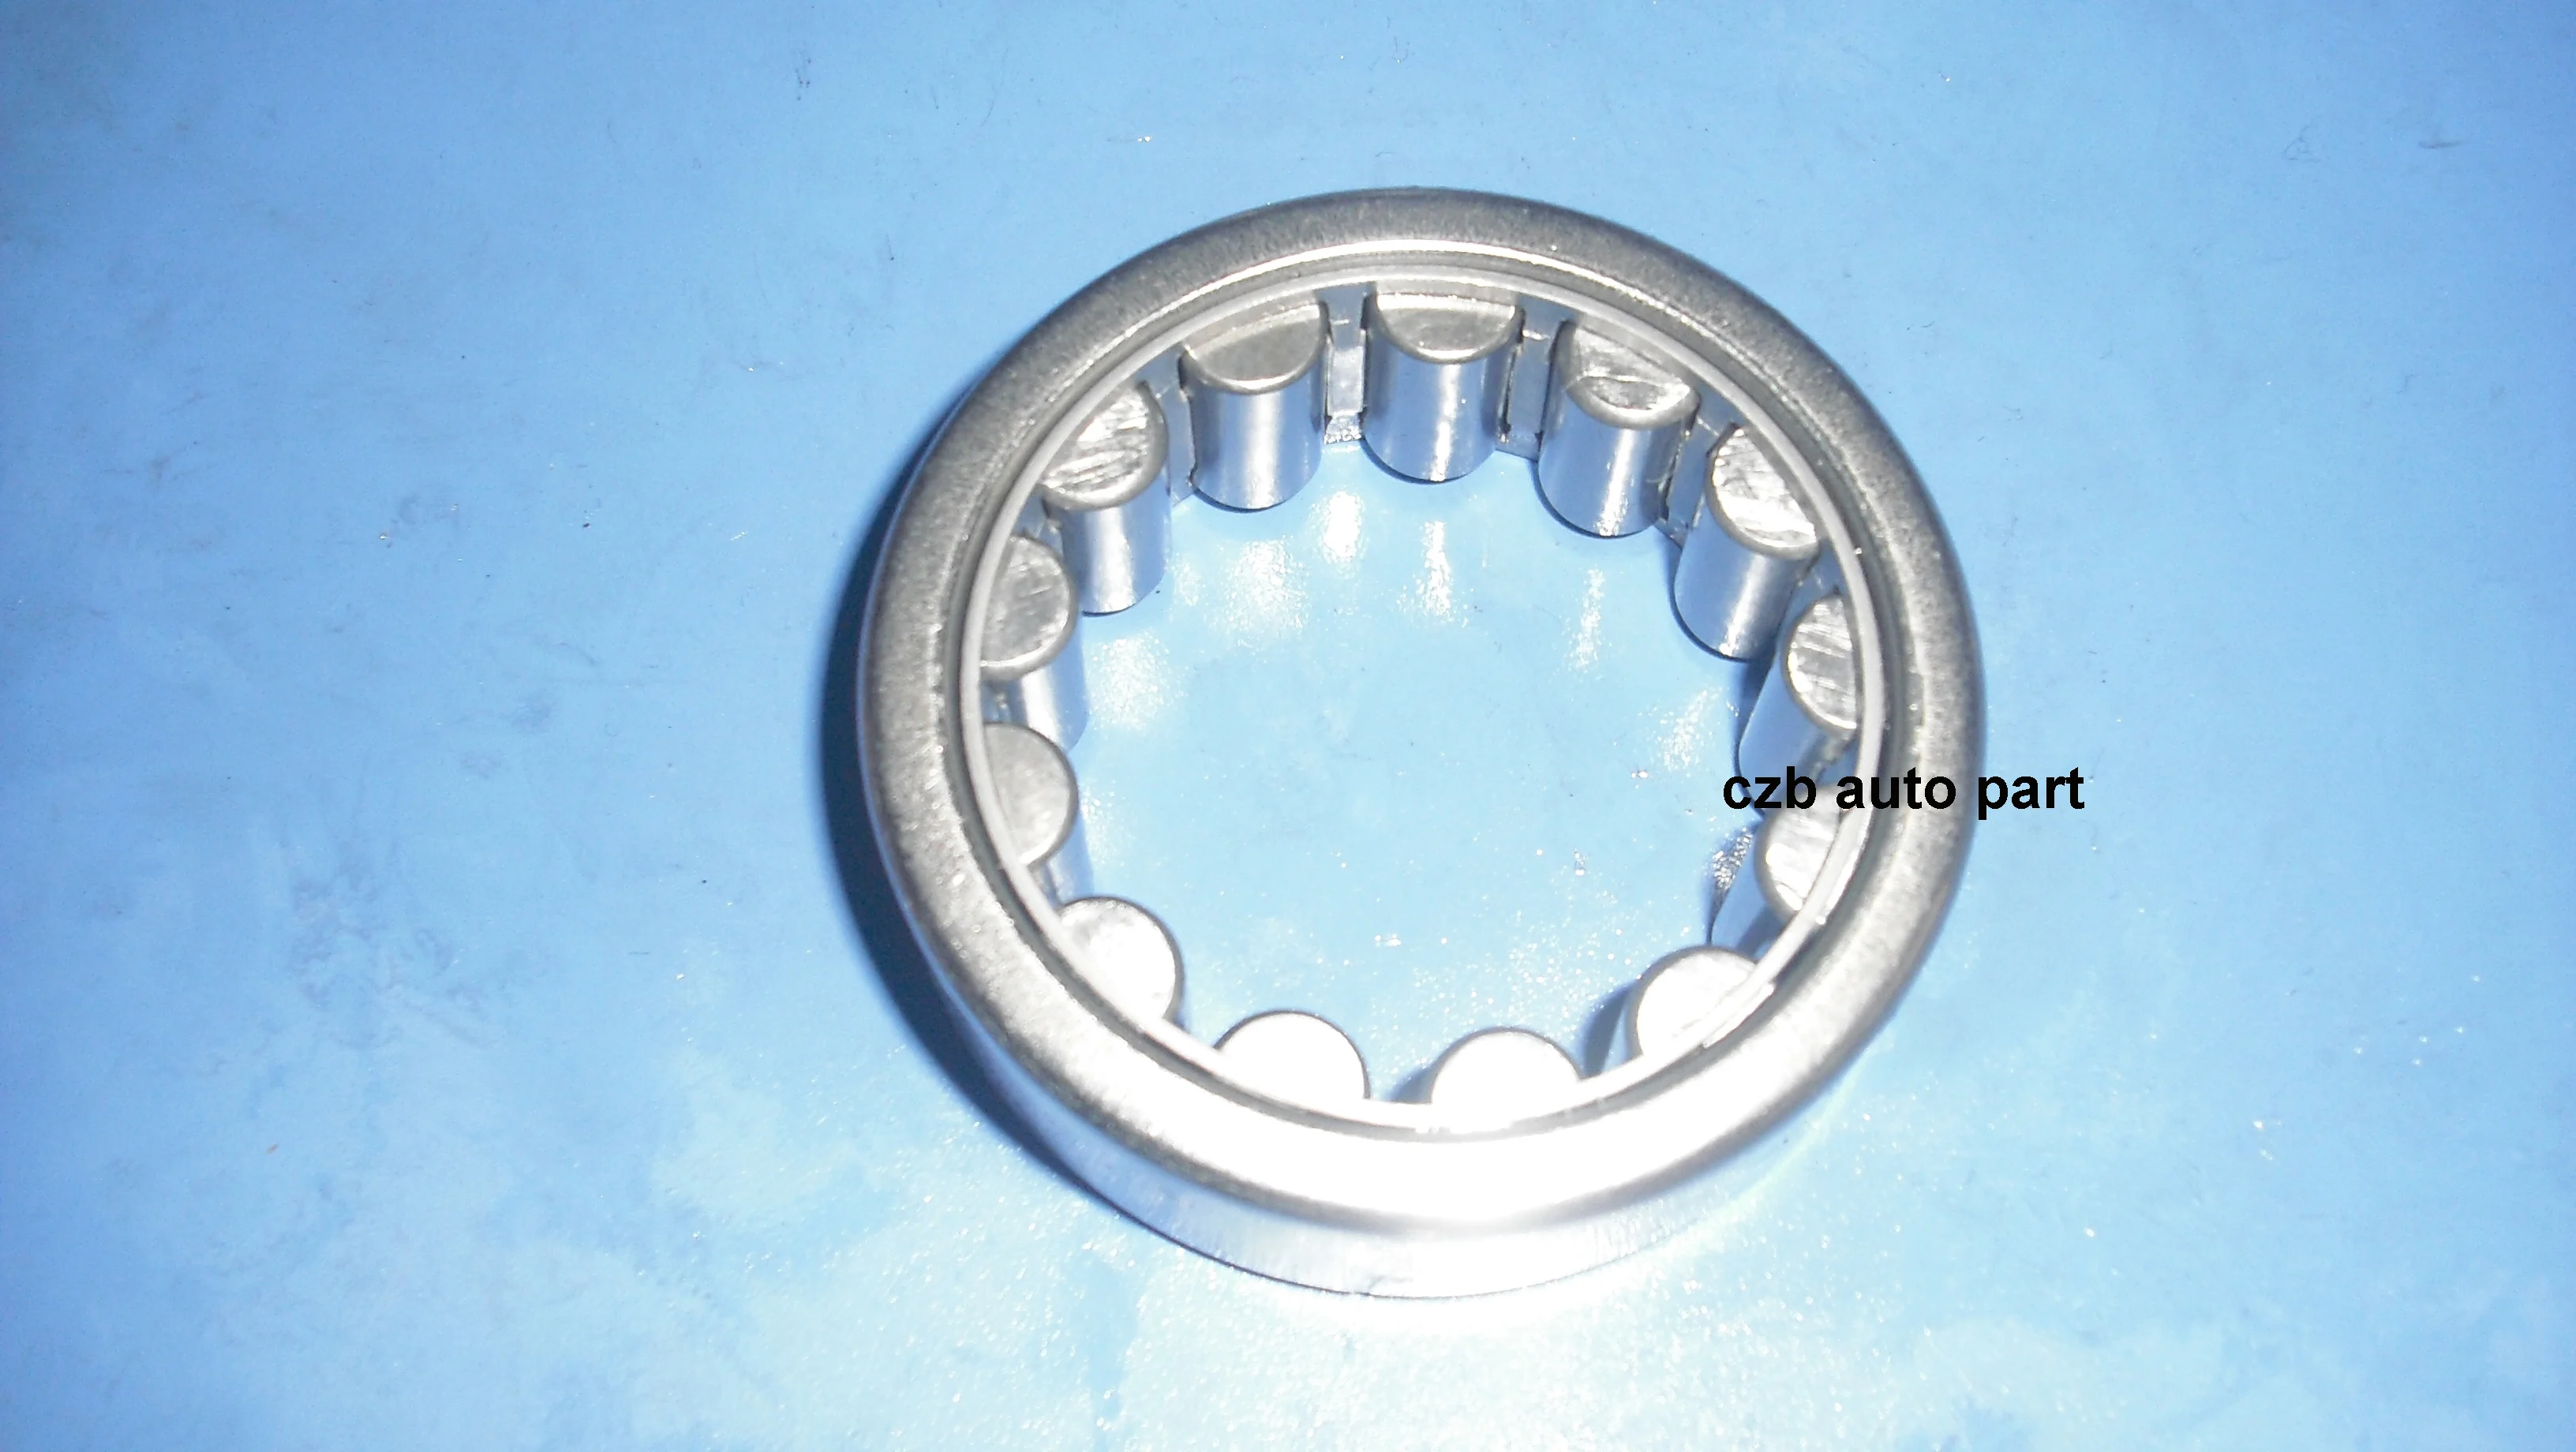 1 Pc DB50185 Needle bearing for auto part DB-50185